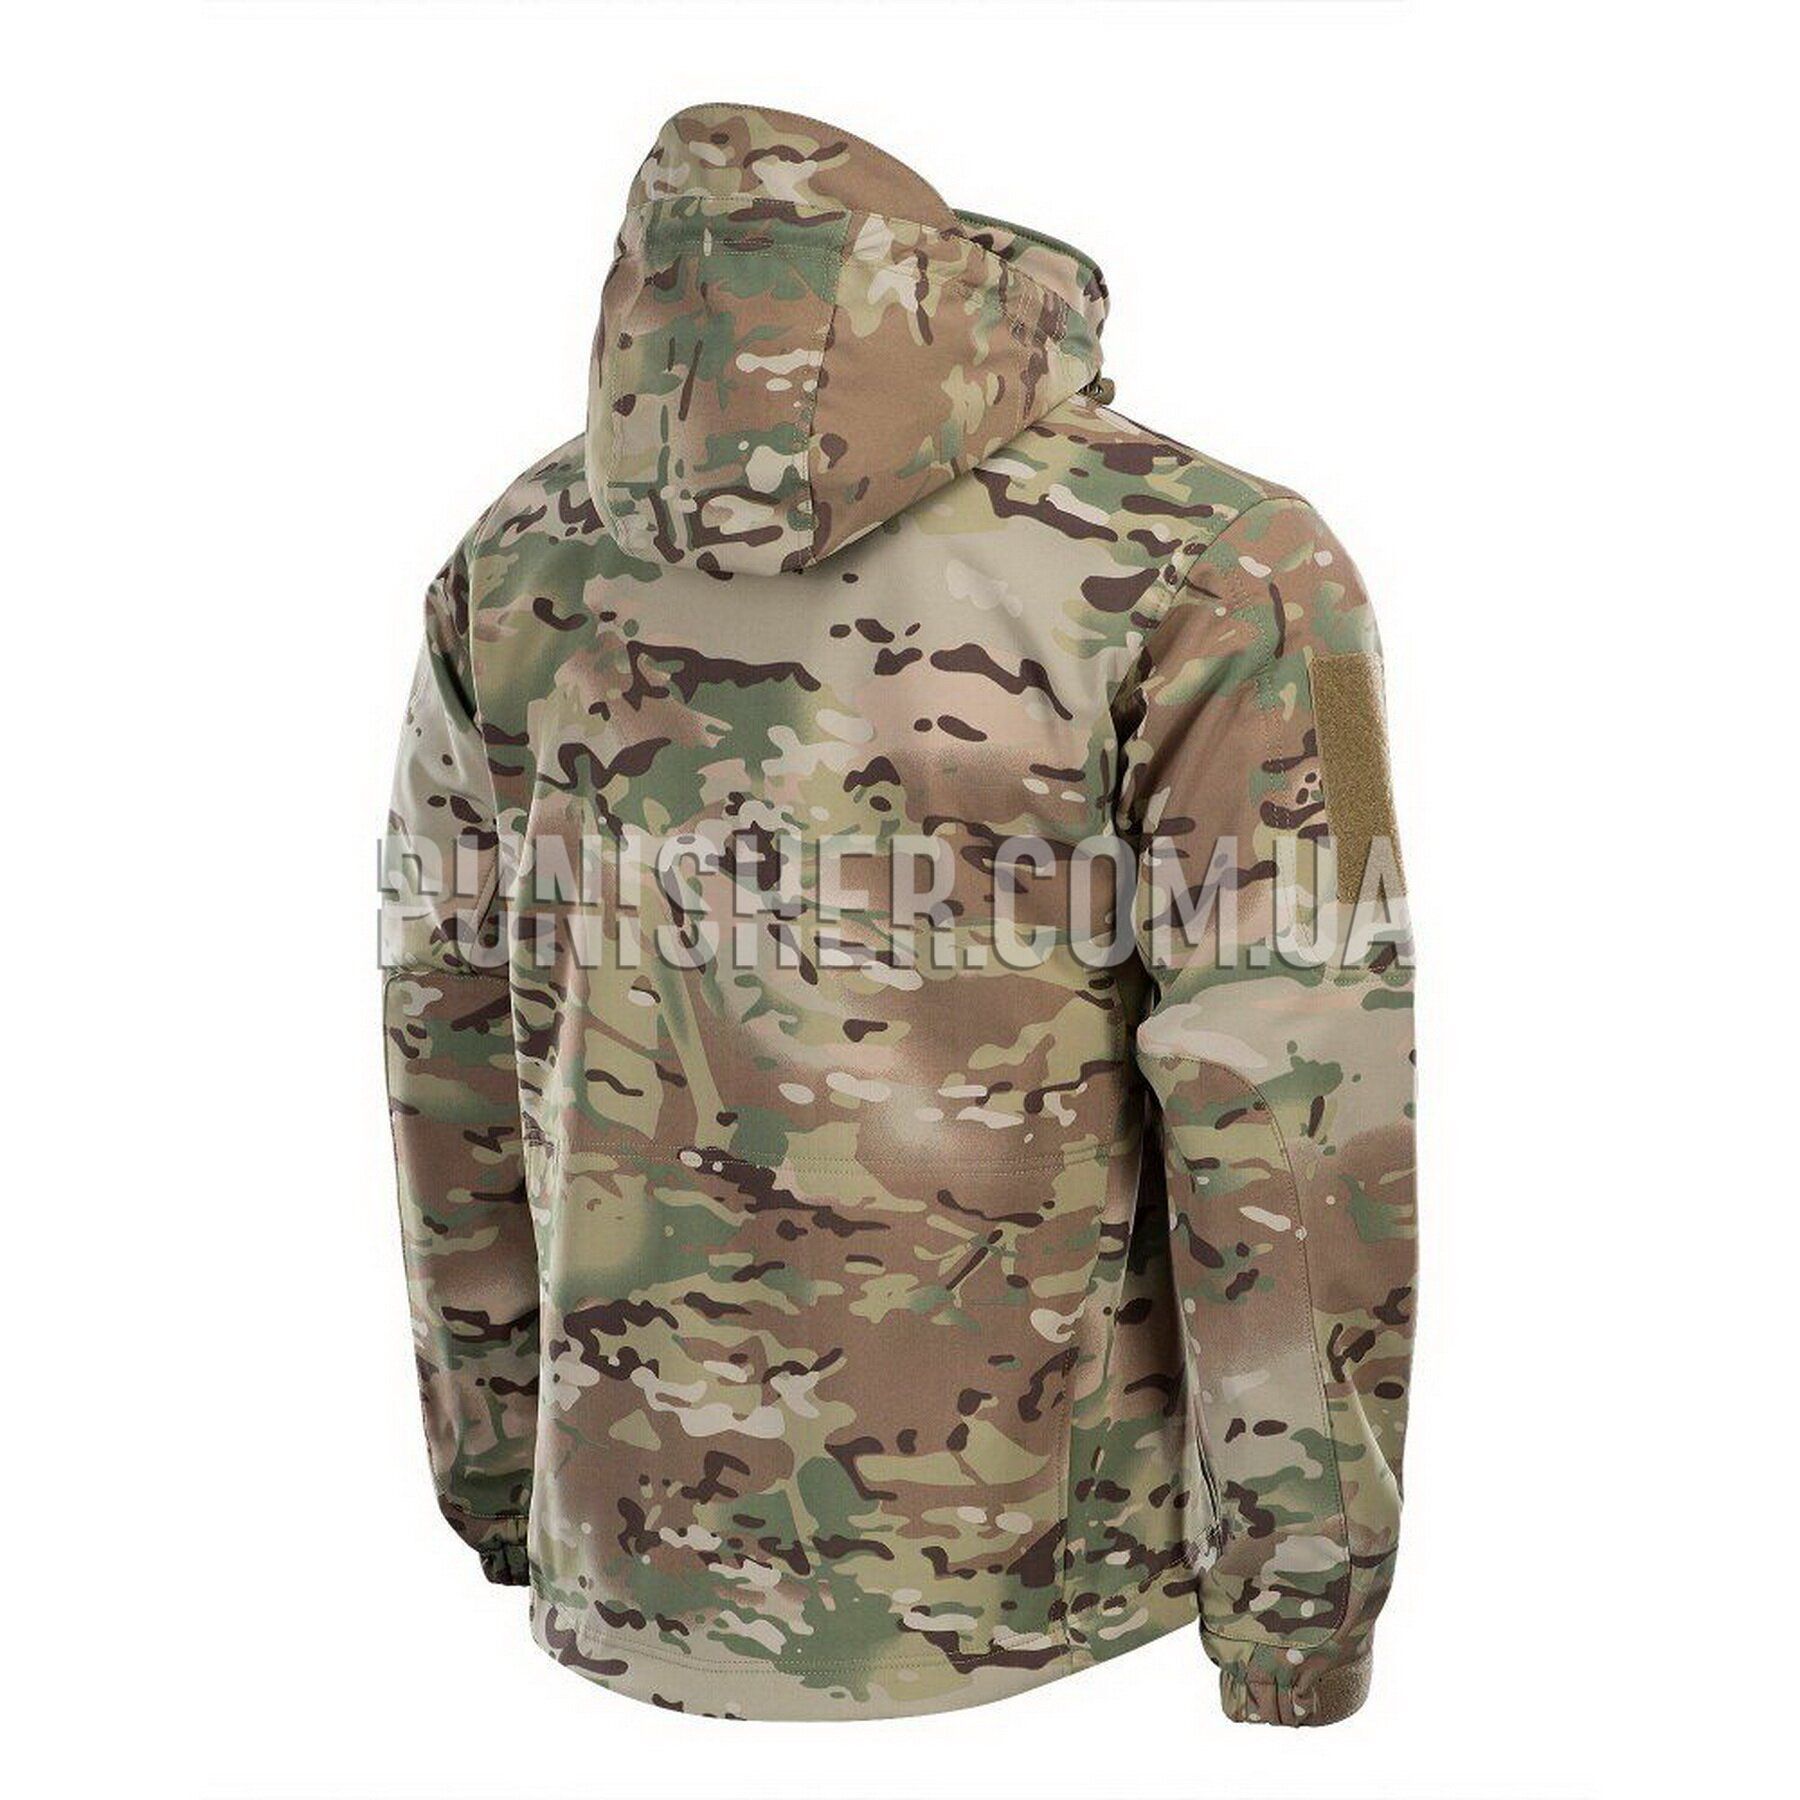 M-Tac Soft Shell Jacket MC Multicam buy with international delivery ...